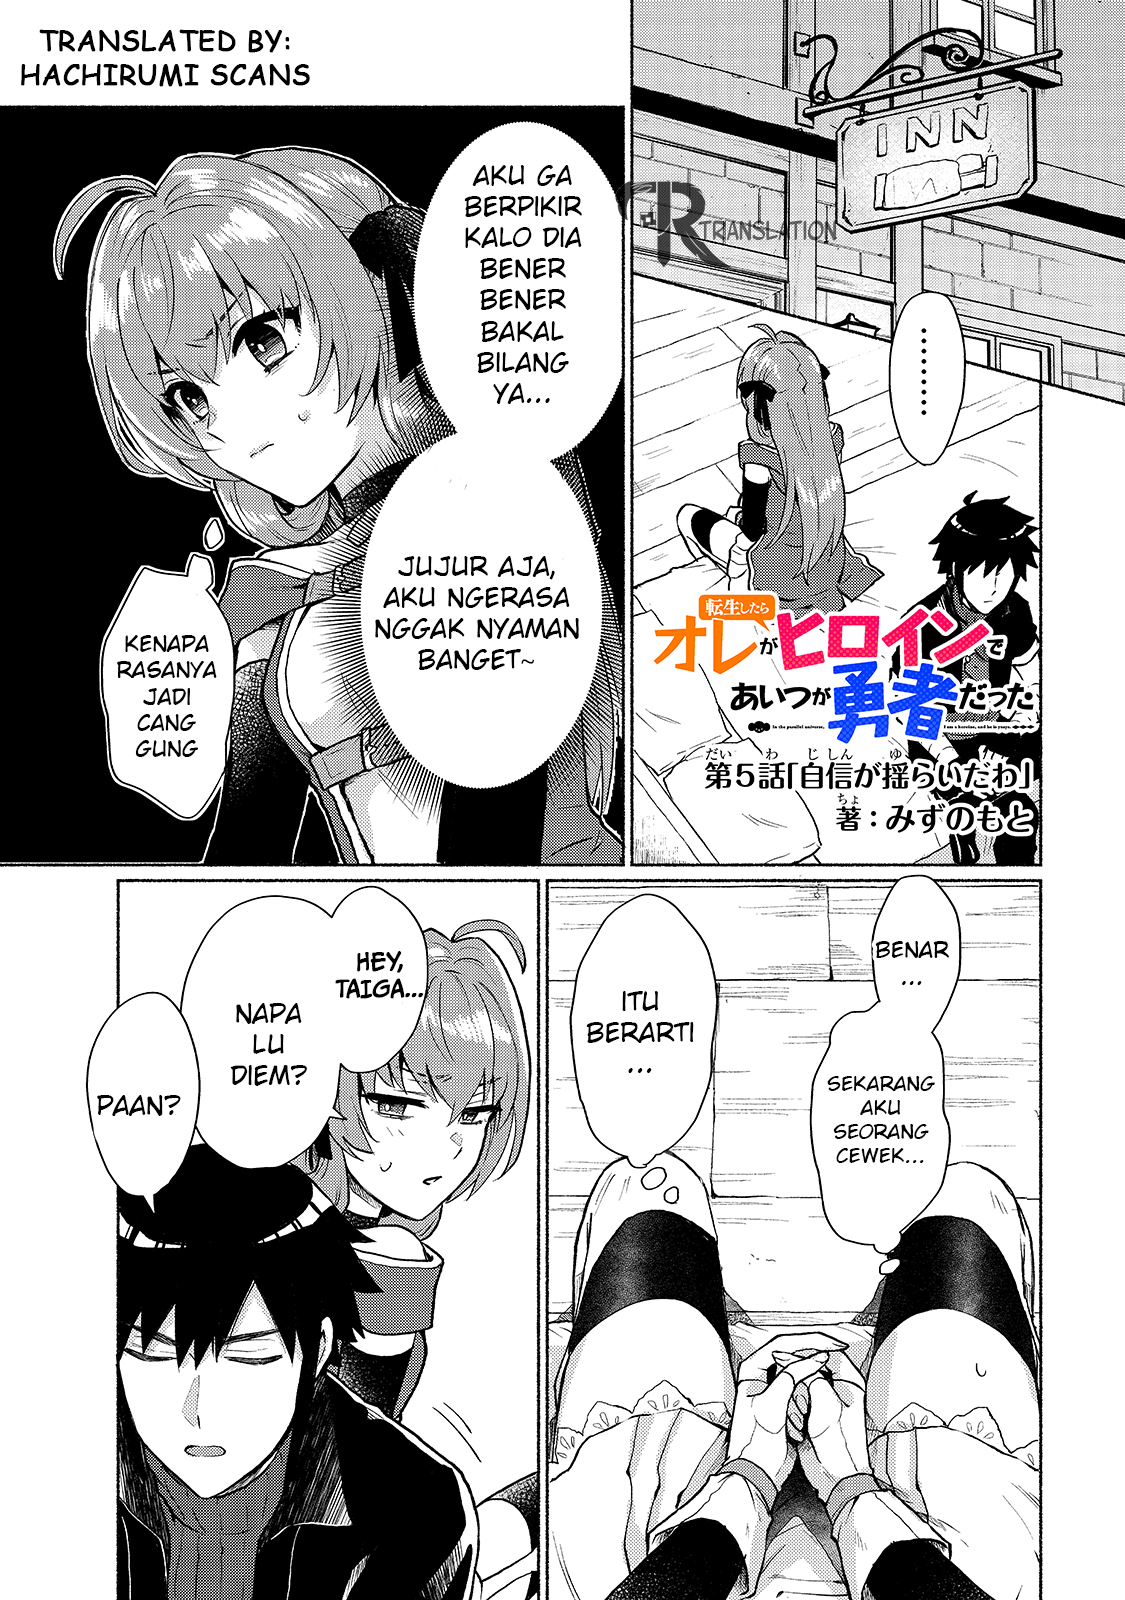 Dilarang COPAS - situs resmi www.mangacanblog.com - Komik when i was reincarnated in another world i was a heroine and he was a hero 005 - chapter 5 6 Indonesia when i was reincarnated in another world i was a heroine and he was a hero 005 - chapter 5 Terbaru 1|Baca Manga Komik Indonesia|Mangacan